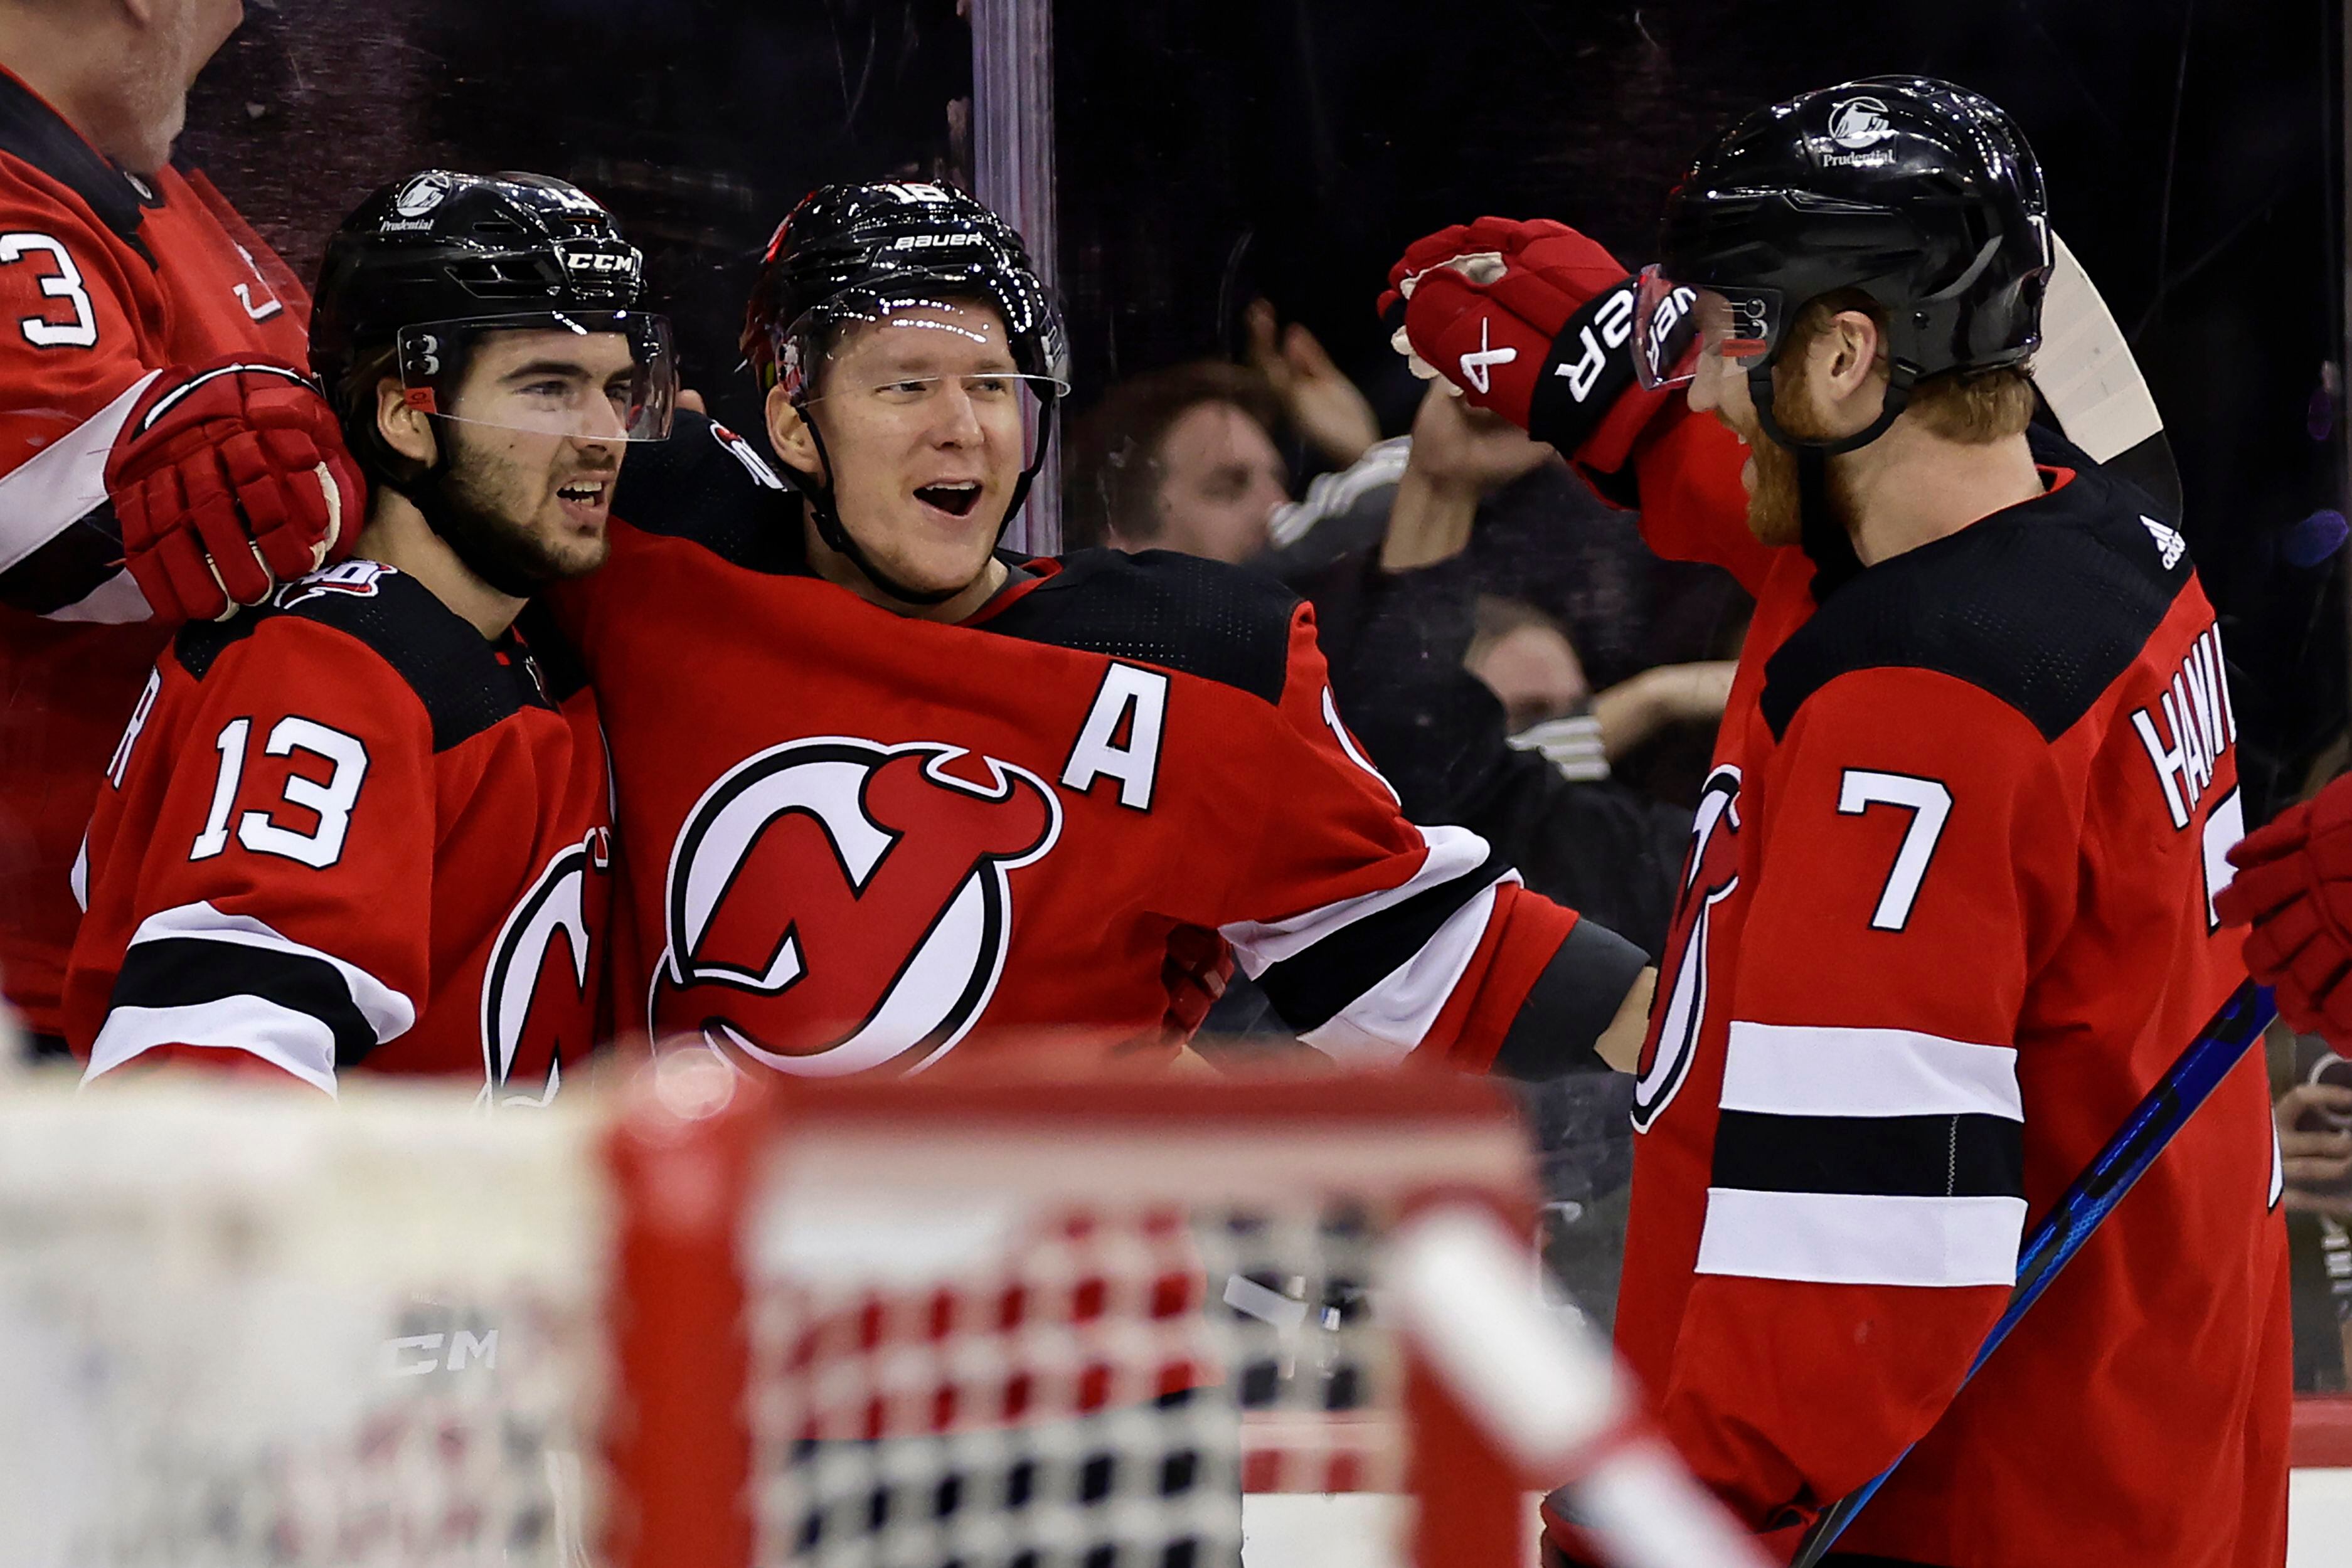 Devils answer in Game 3, rout Hurricanes 8-4, deficit now 2-1